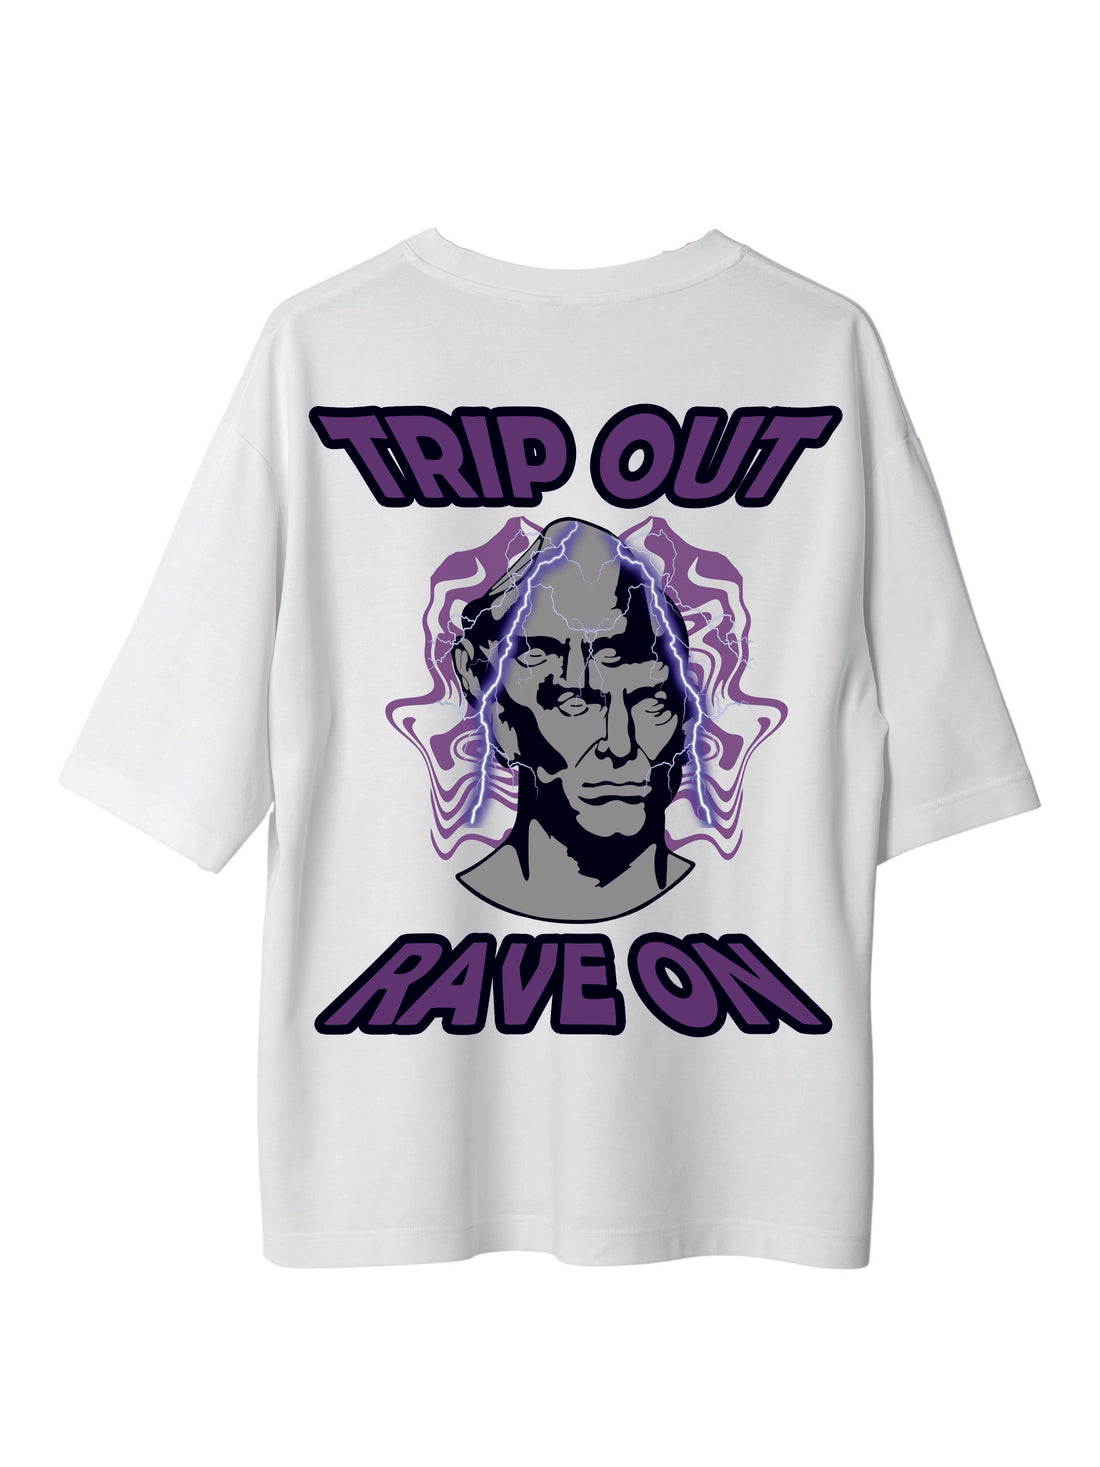 Trip out rave on - Burger Bae Oversized  Tee For Men and Women